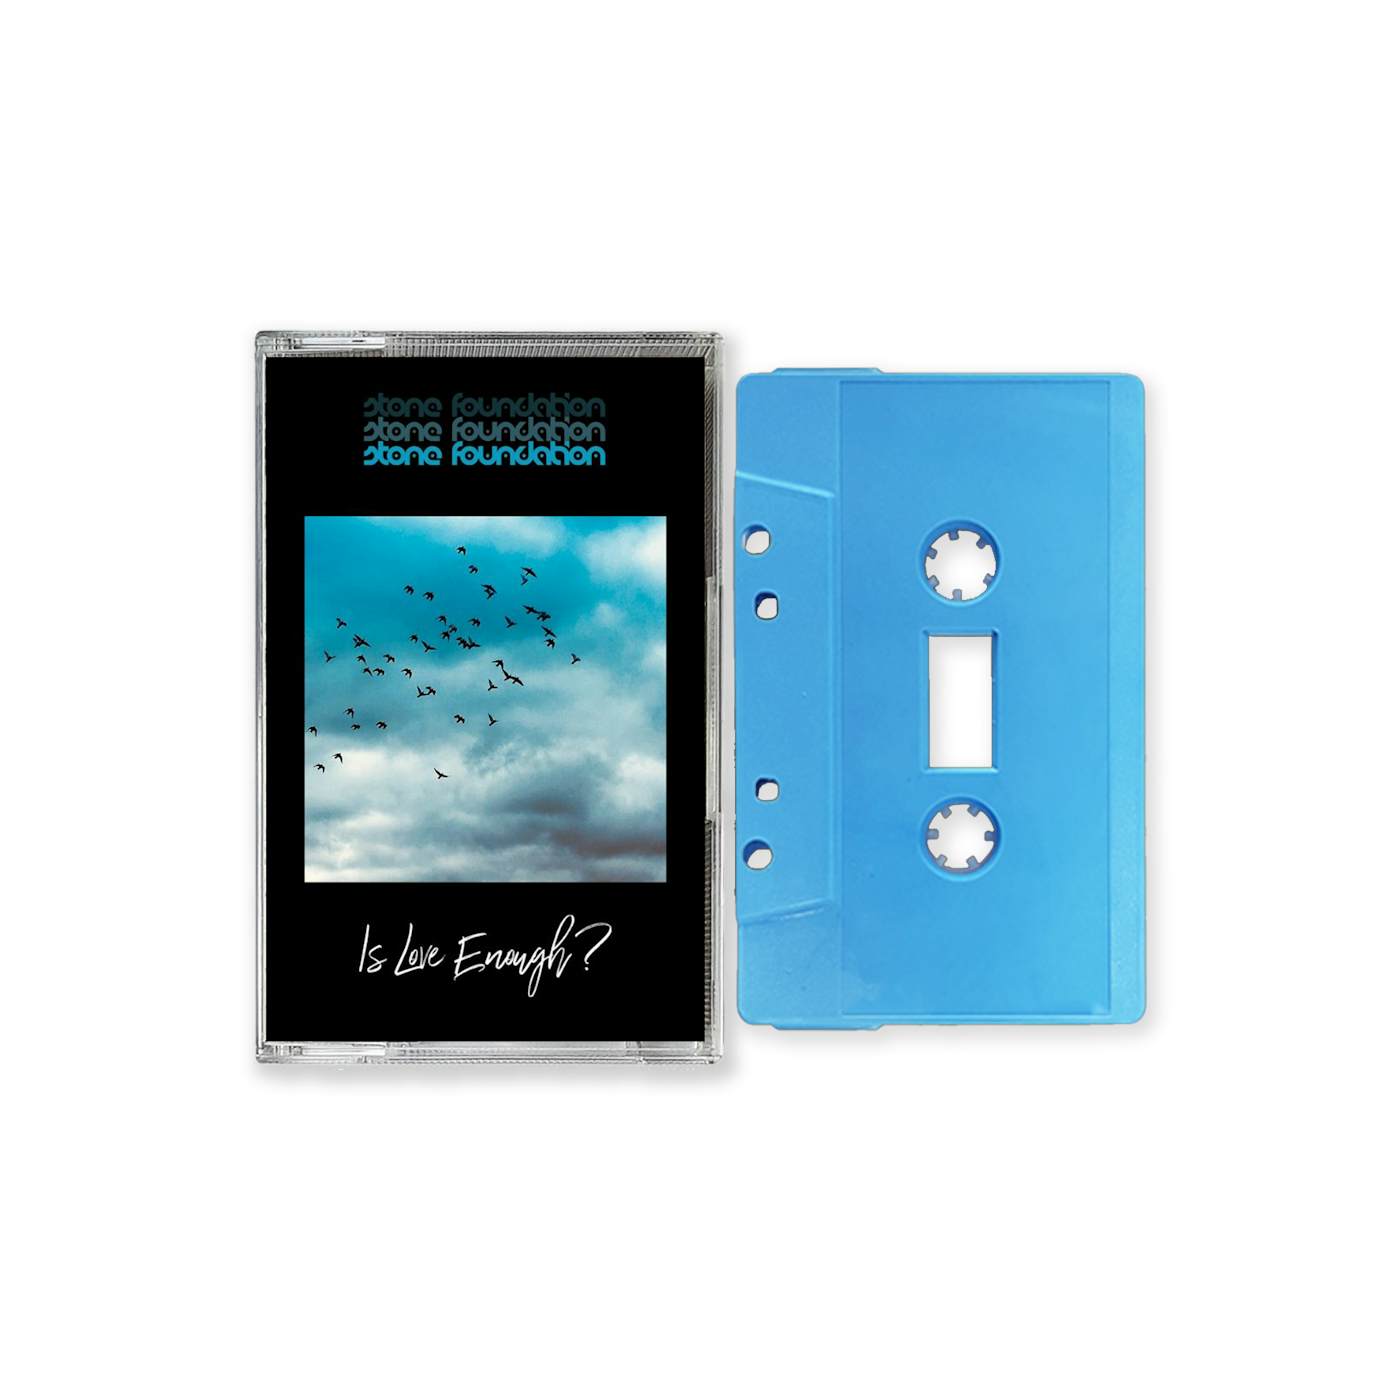 Stone Foundation Is Love Enough? (Cassette)